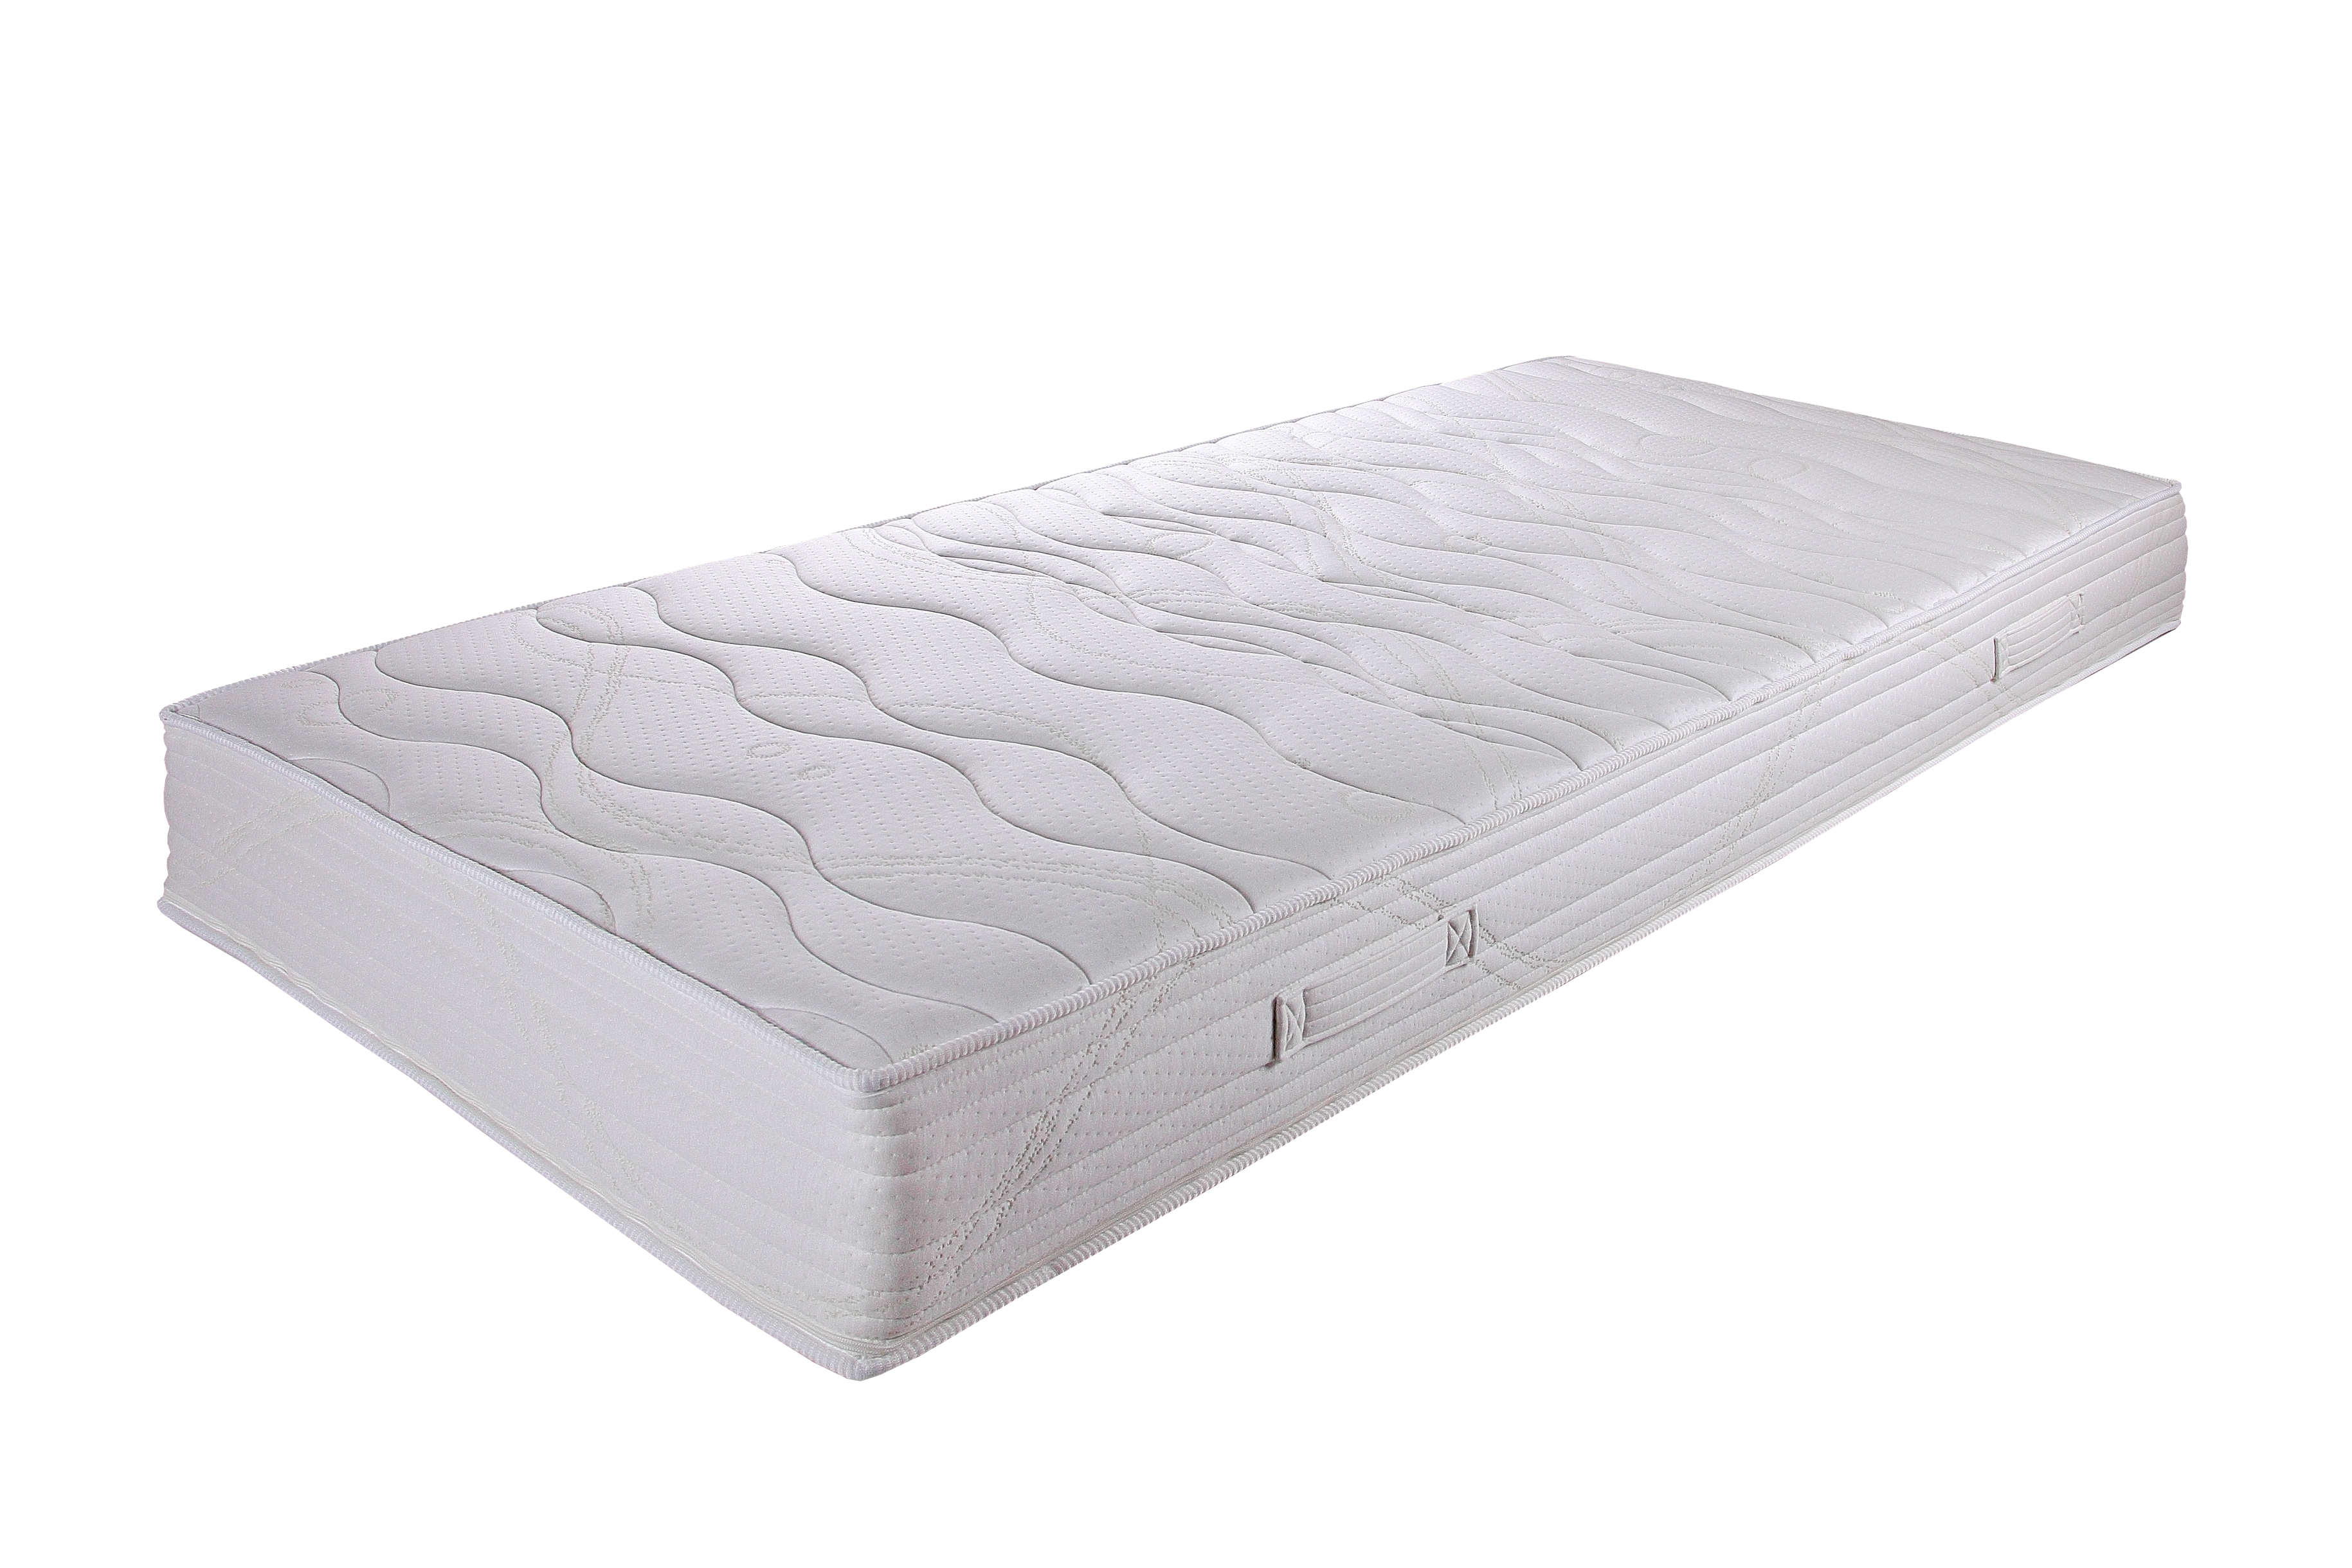 Breckle launches new mattresses for contract applications with Trevira CS covers by Mattes & Ammann. © Photo: Breckle.